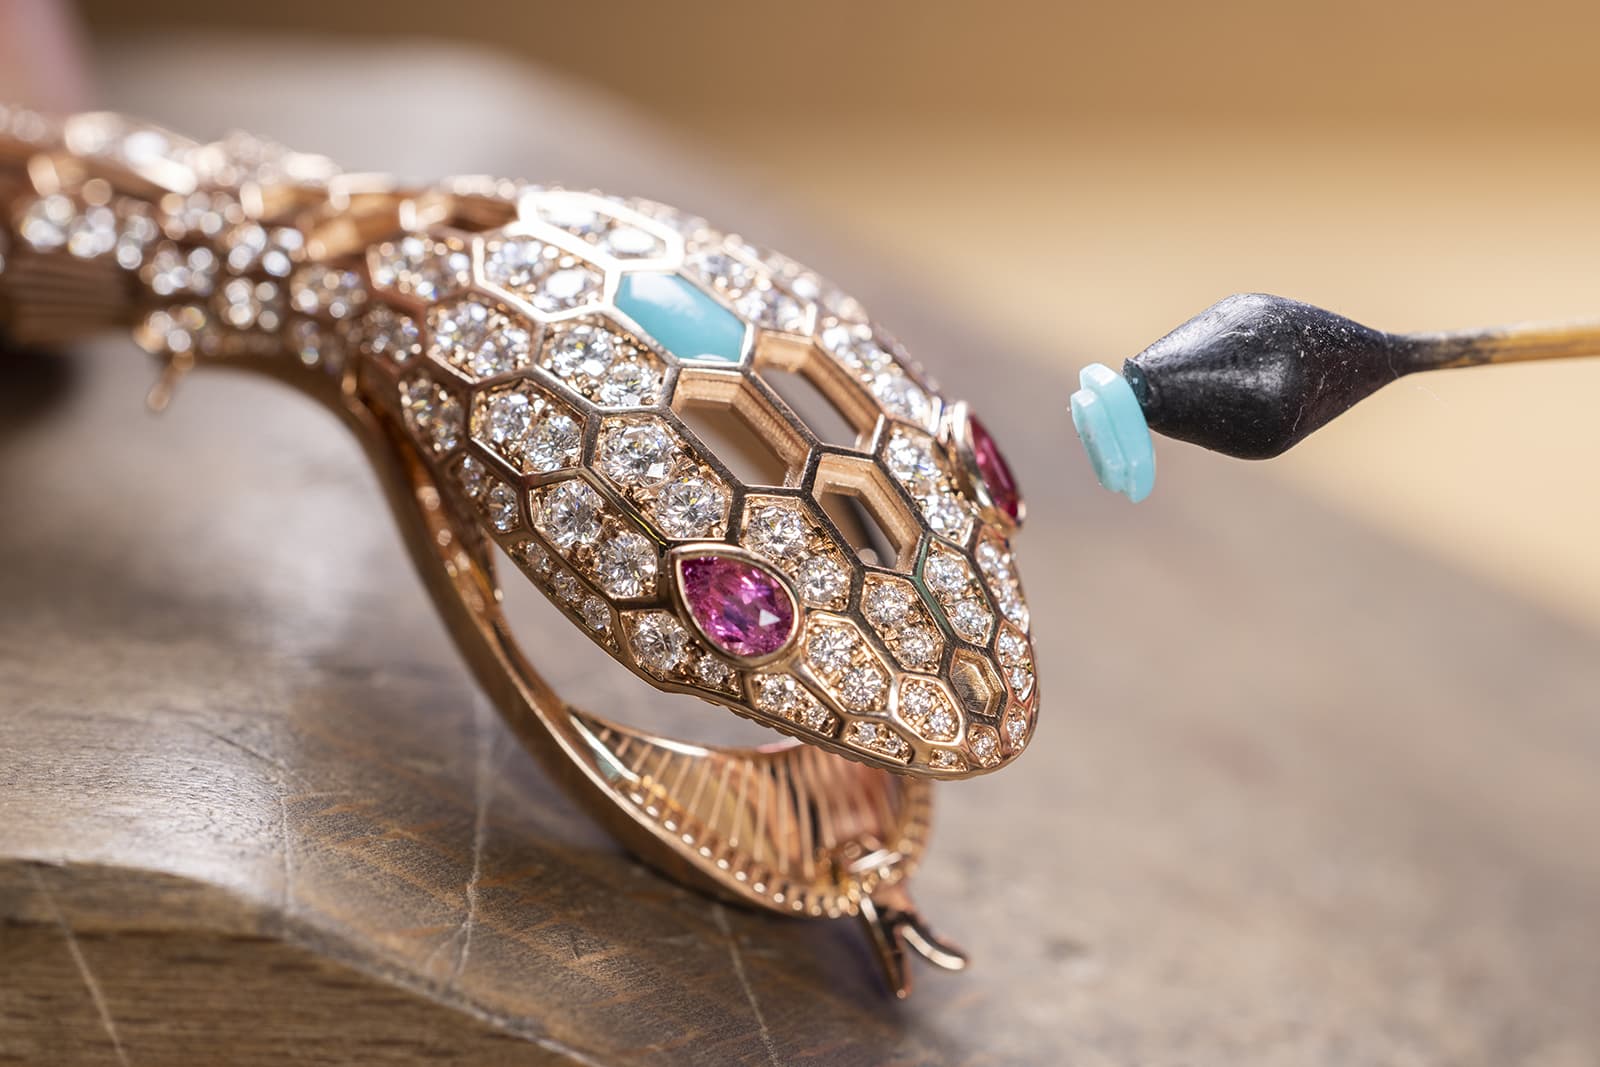 Placing turquoise inserts in one of the new Bulgari Serpenti Misteriosi High Jewellery watches